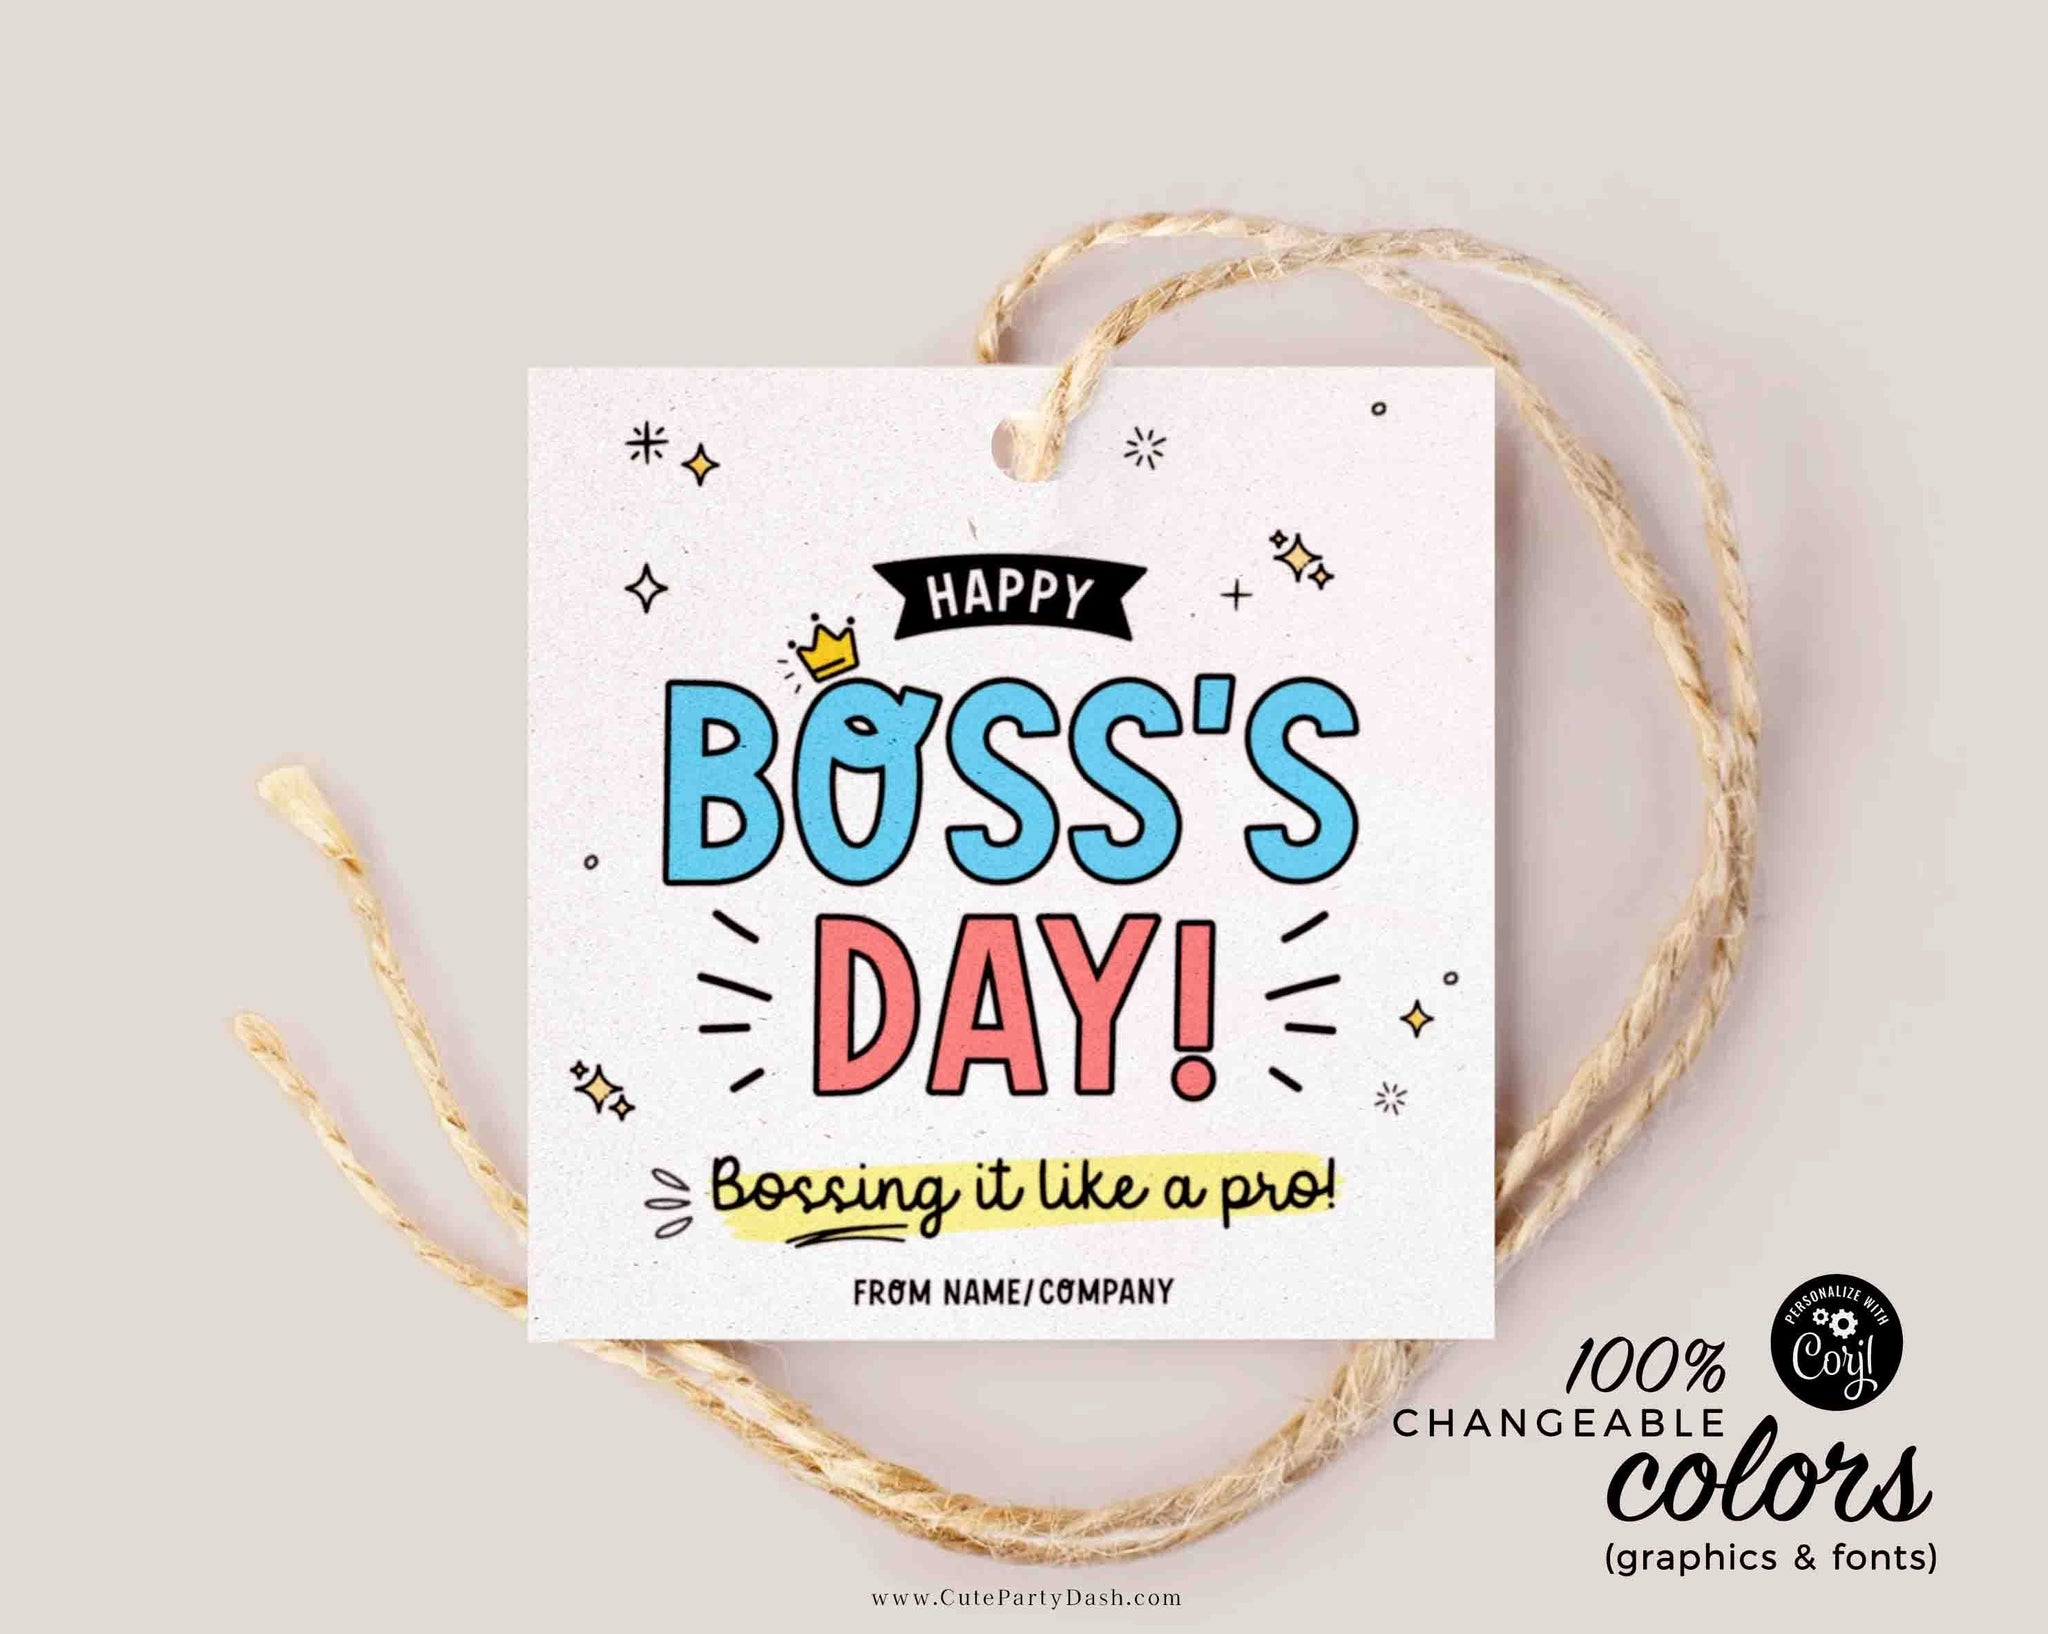 25 DIY Gift ideas for Boss's Day that may just get you that Raise!